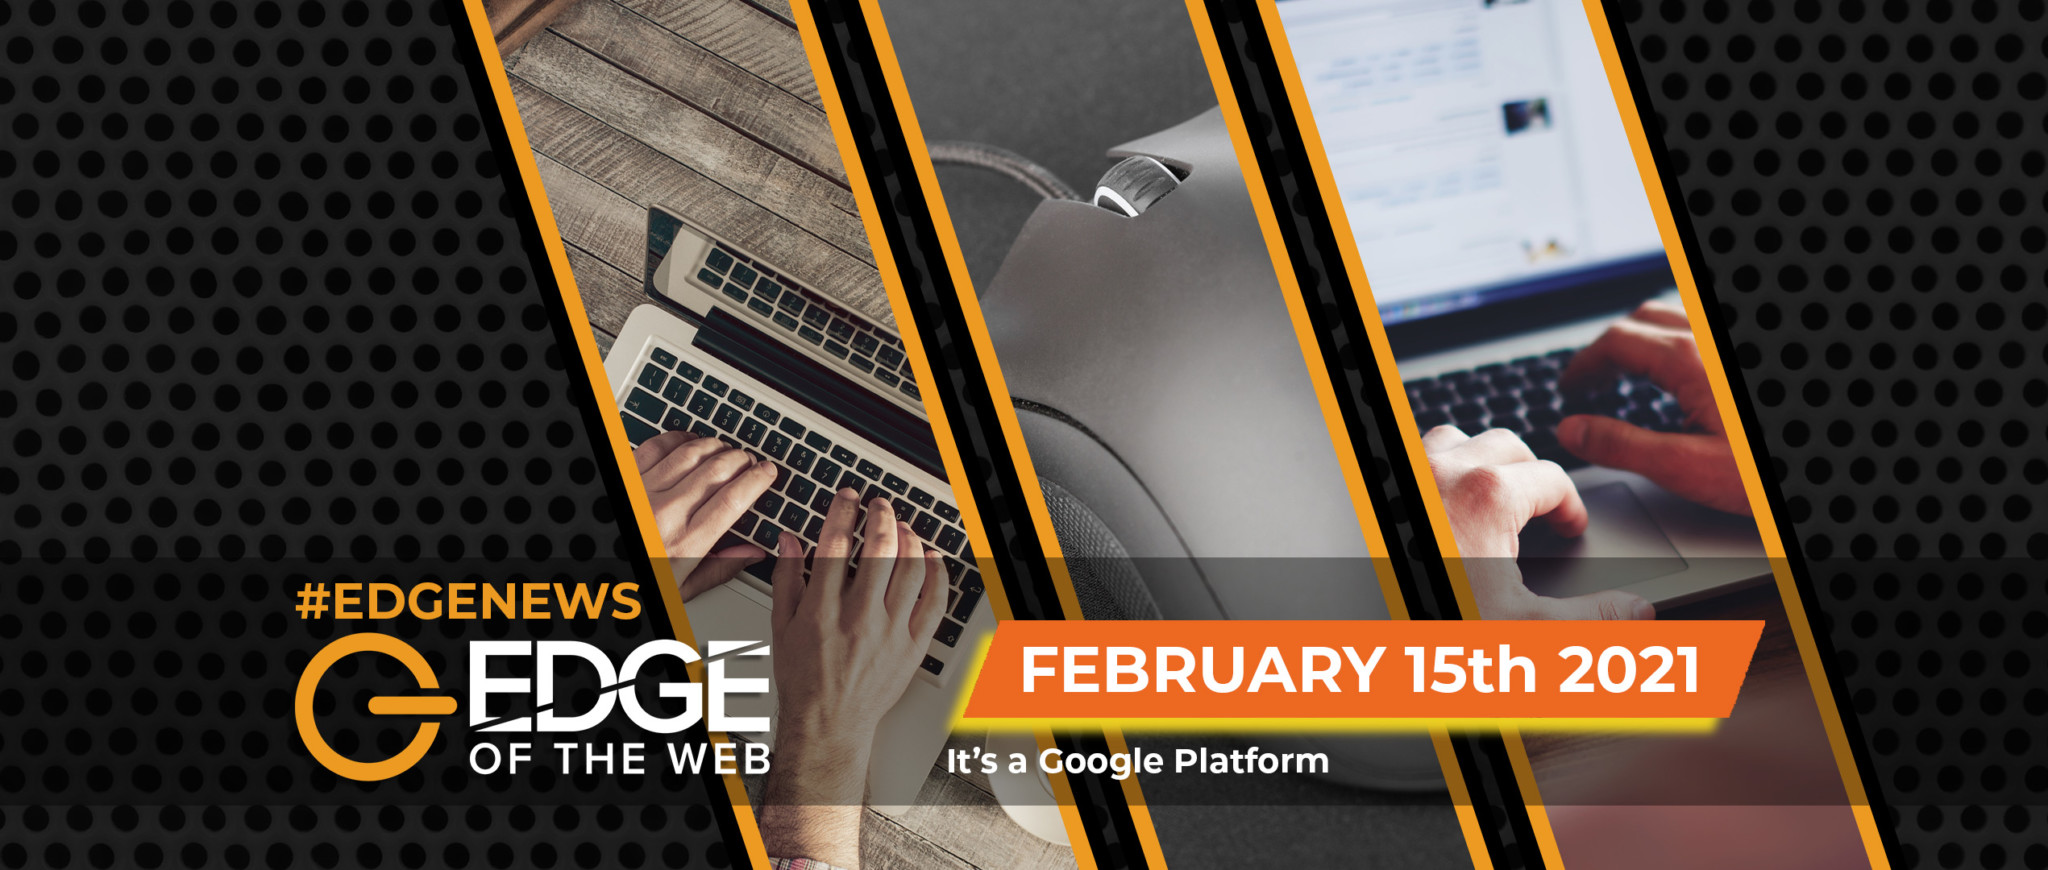 EP394 EDGE of the Web